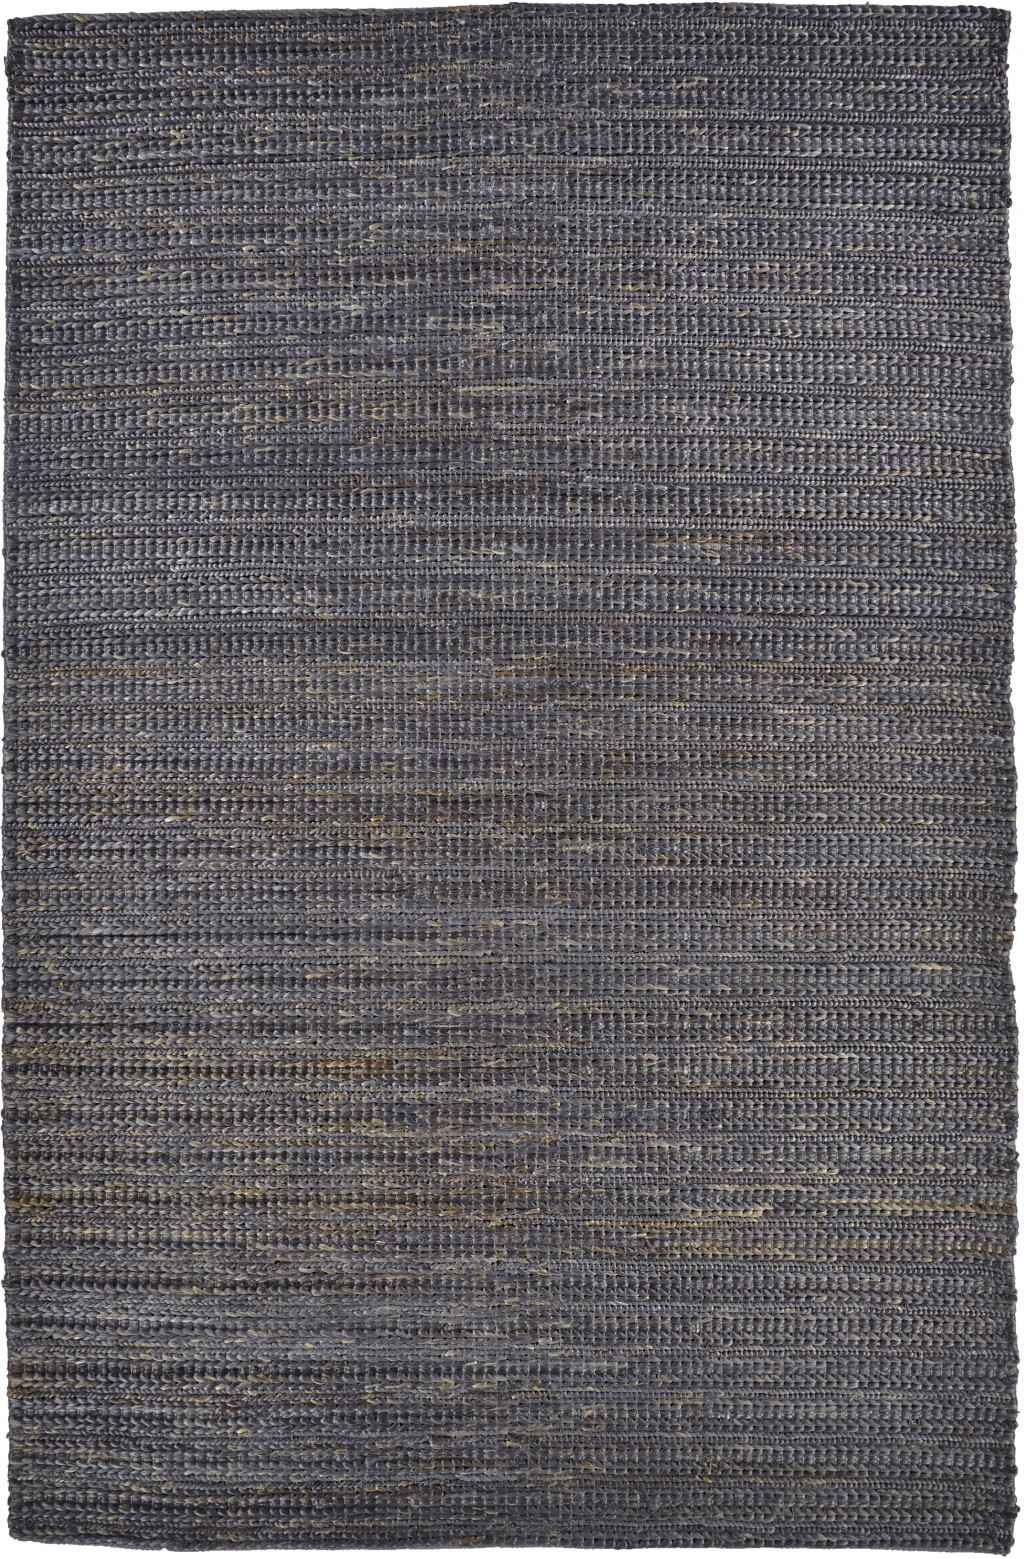 8' X 11' Brown Blue And Taupe Hand Woven Area Rug-511427-1